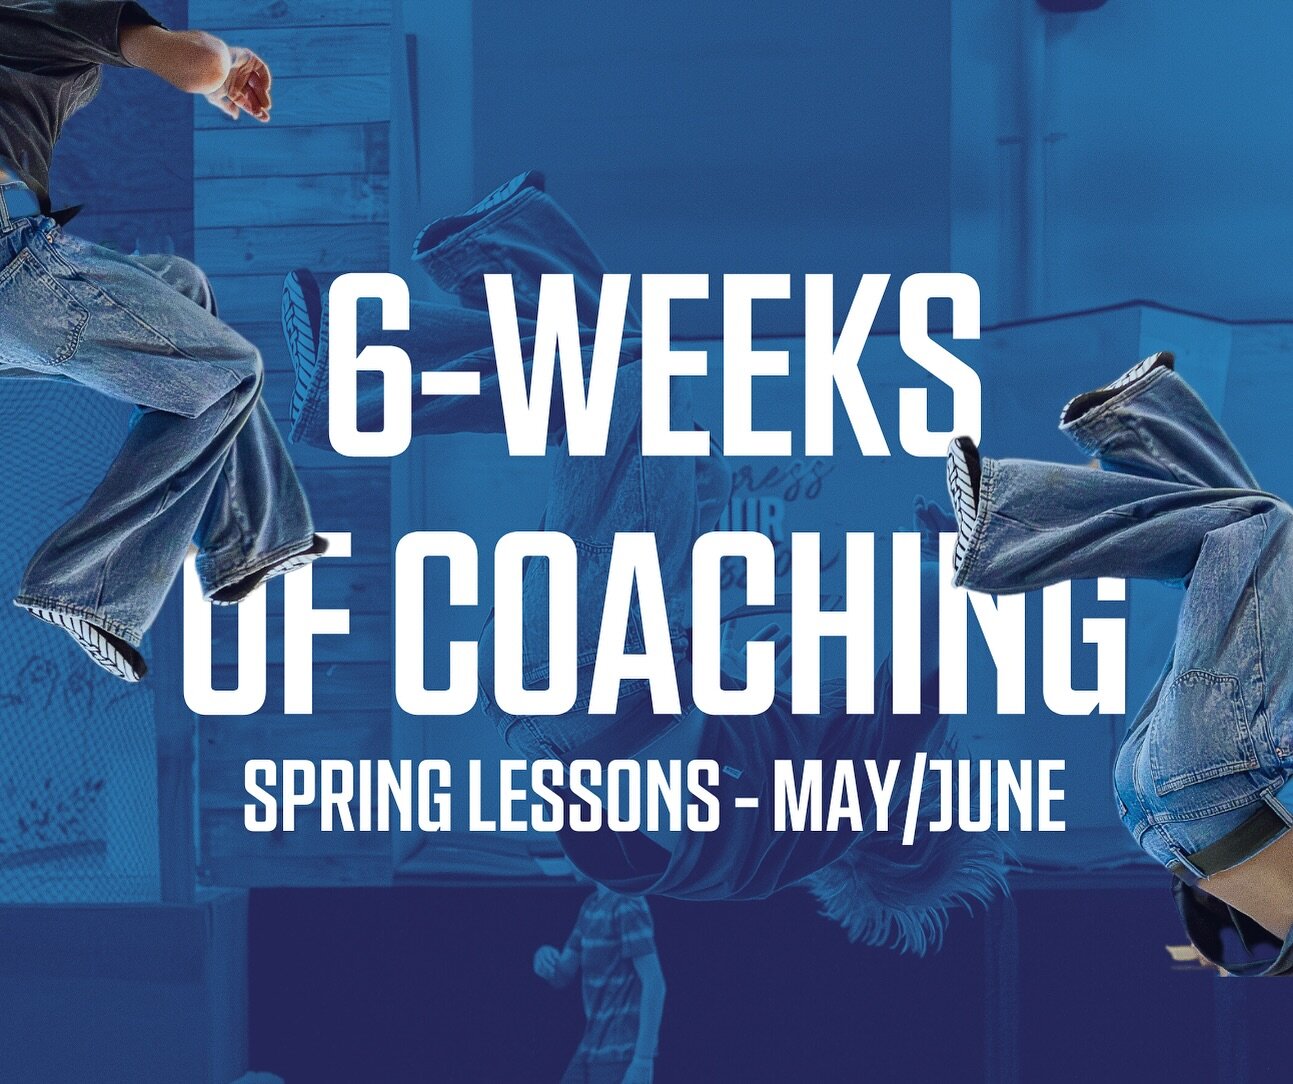 Spring LESSONS are a go!
This week we kicked off spring 1, you can join late and prorata IF there is space. Otherwise, get ready for spring 2!

In May + June take 6-weeks of epic coaching in a whole host of sports, for ages:
Tot and Pre K (45mins)
Ki